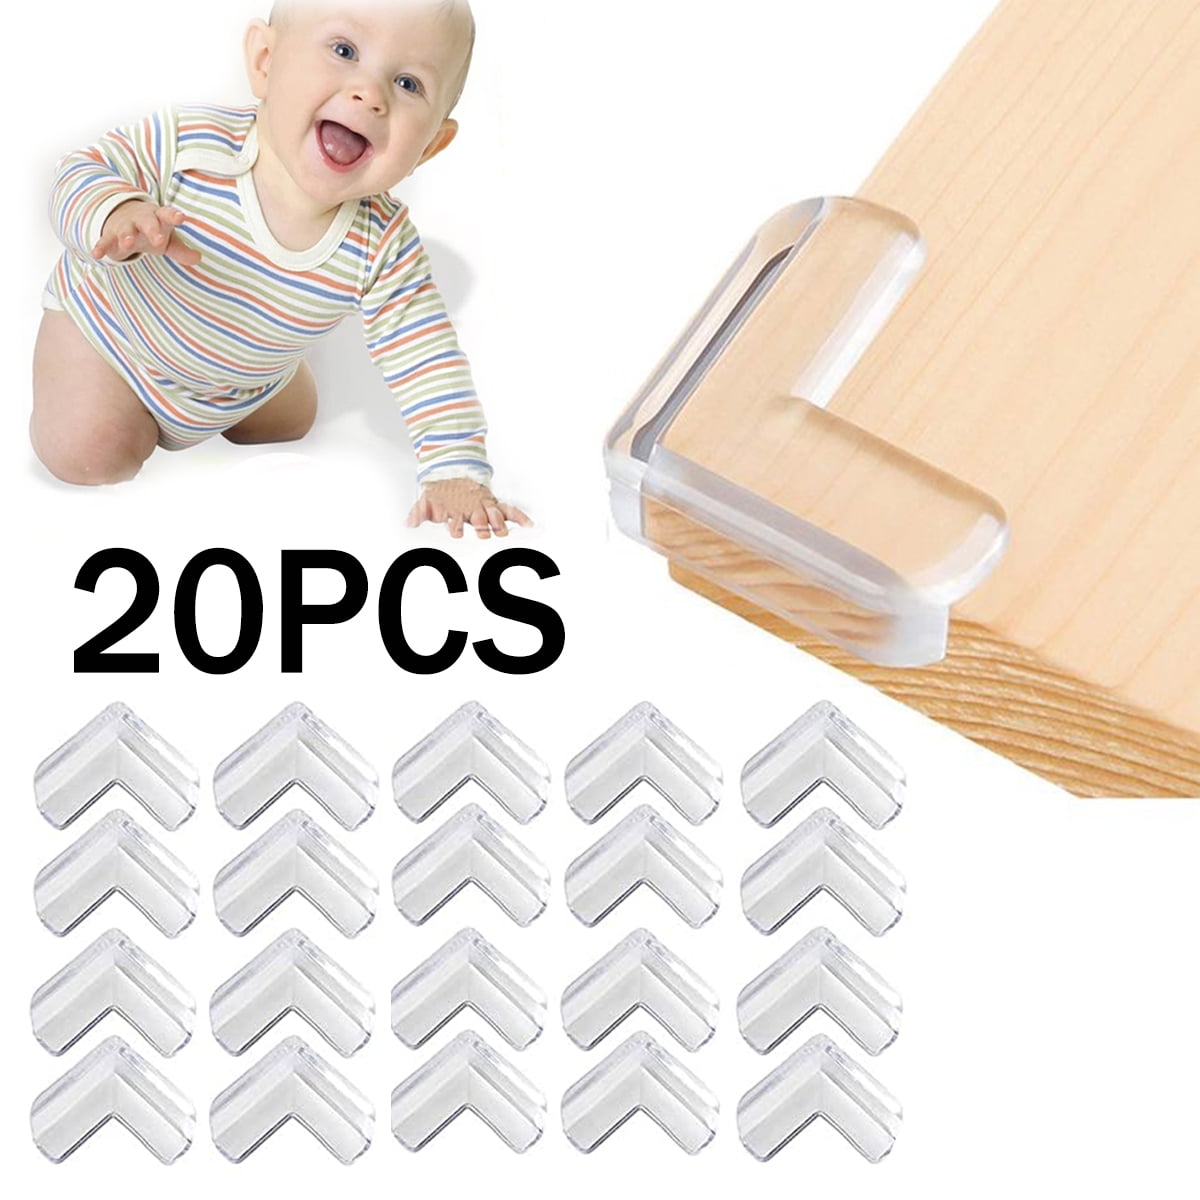 8-Pack) Clear Edge Bumpers Corner Protectors for Baby Safety from